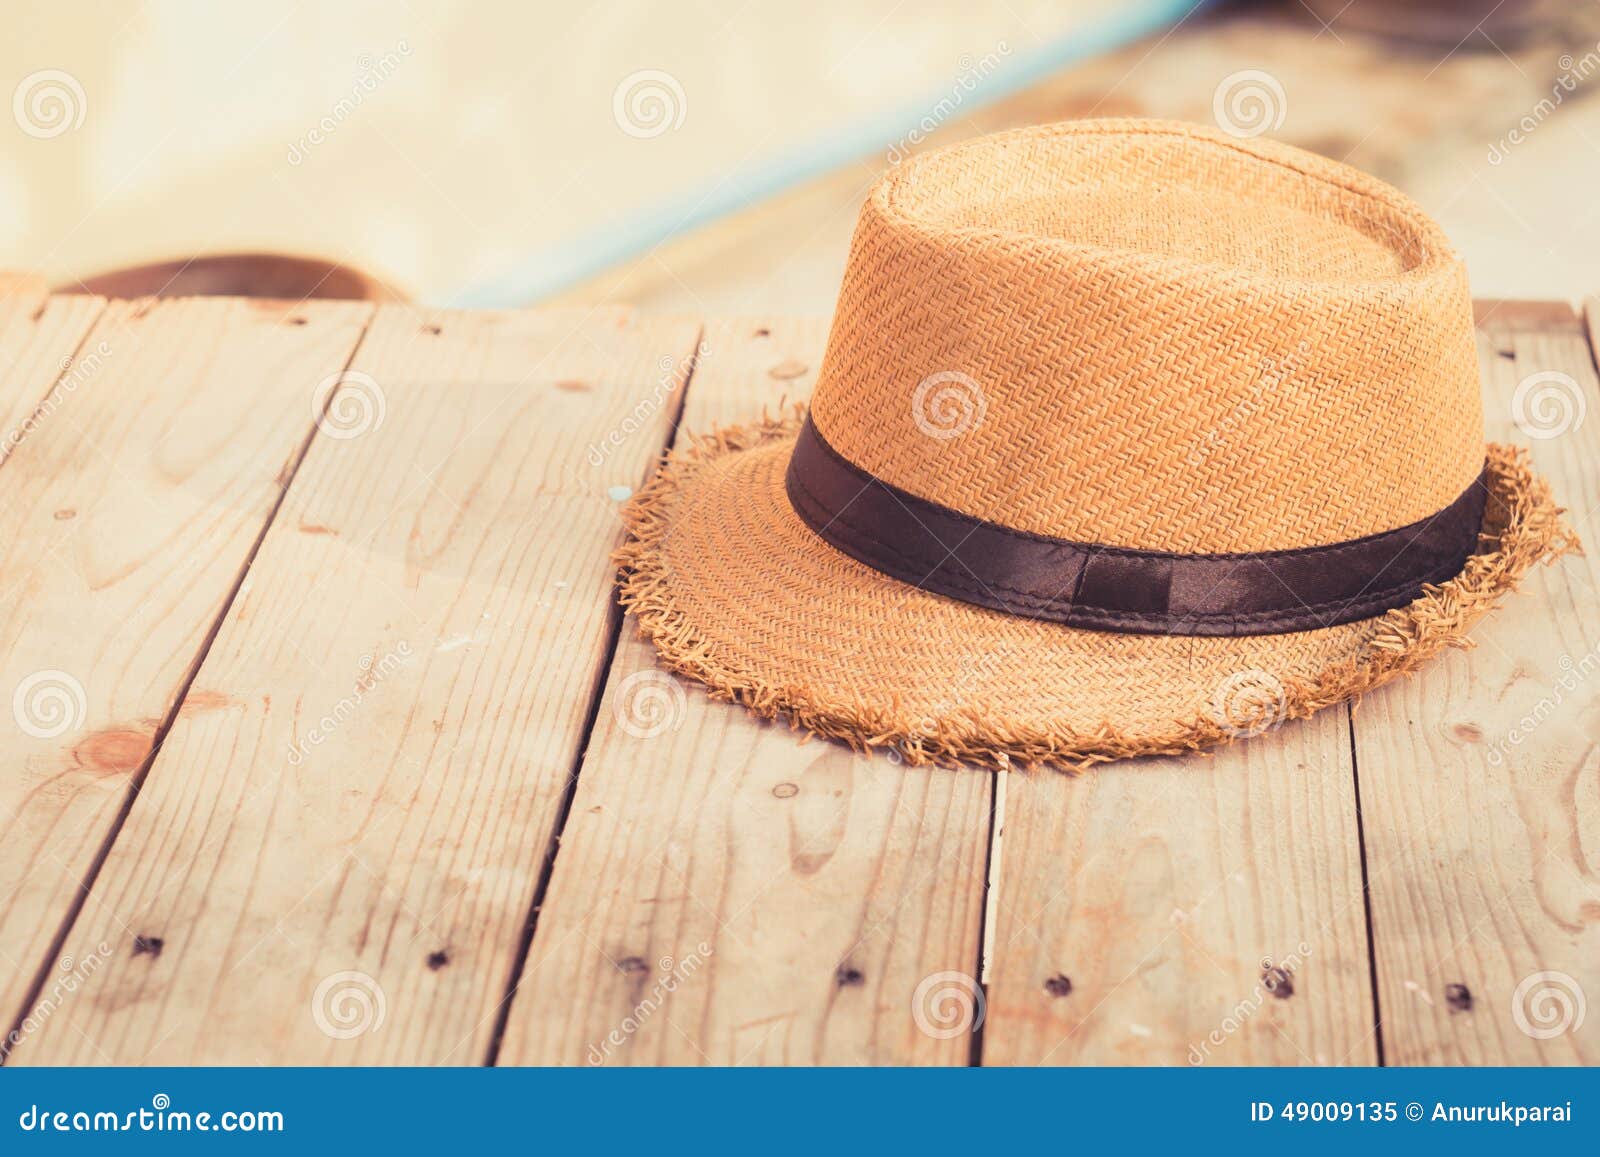 Wicker hat with sun light stock image. Image of summer - 49009135